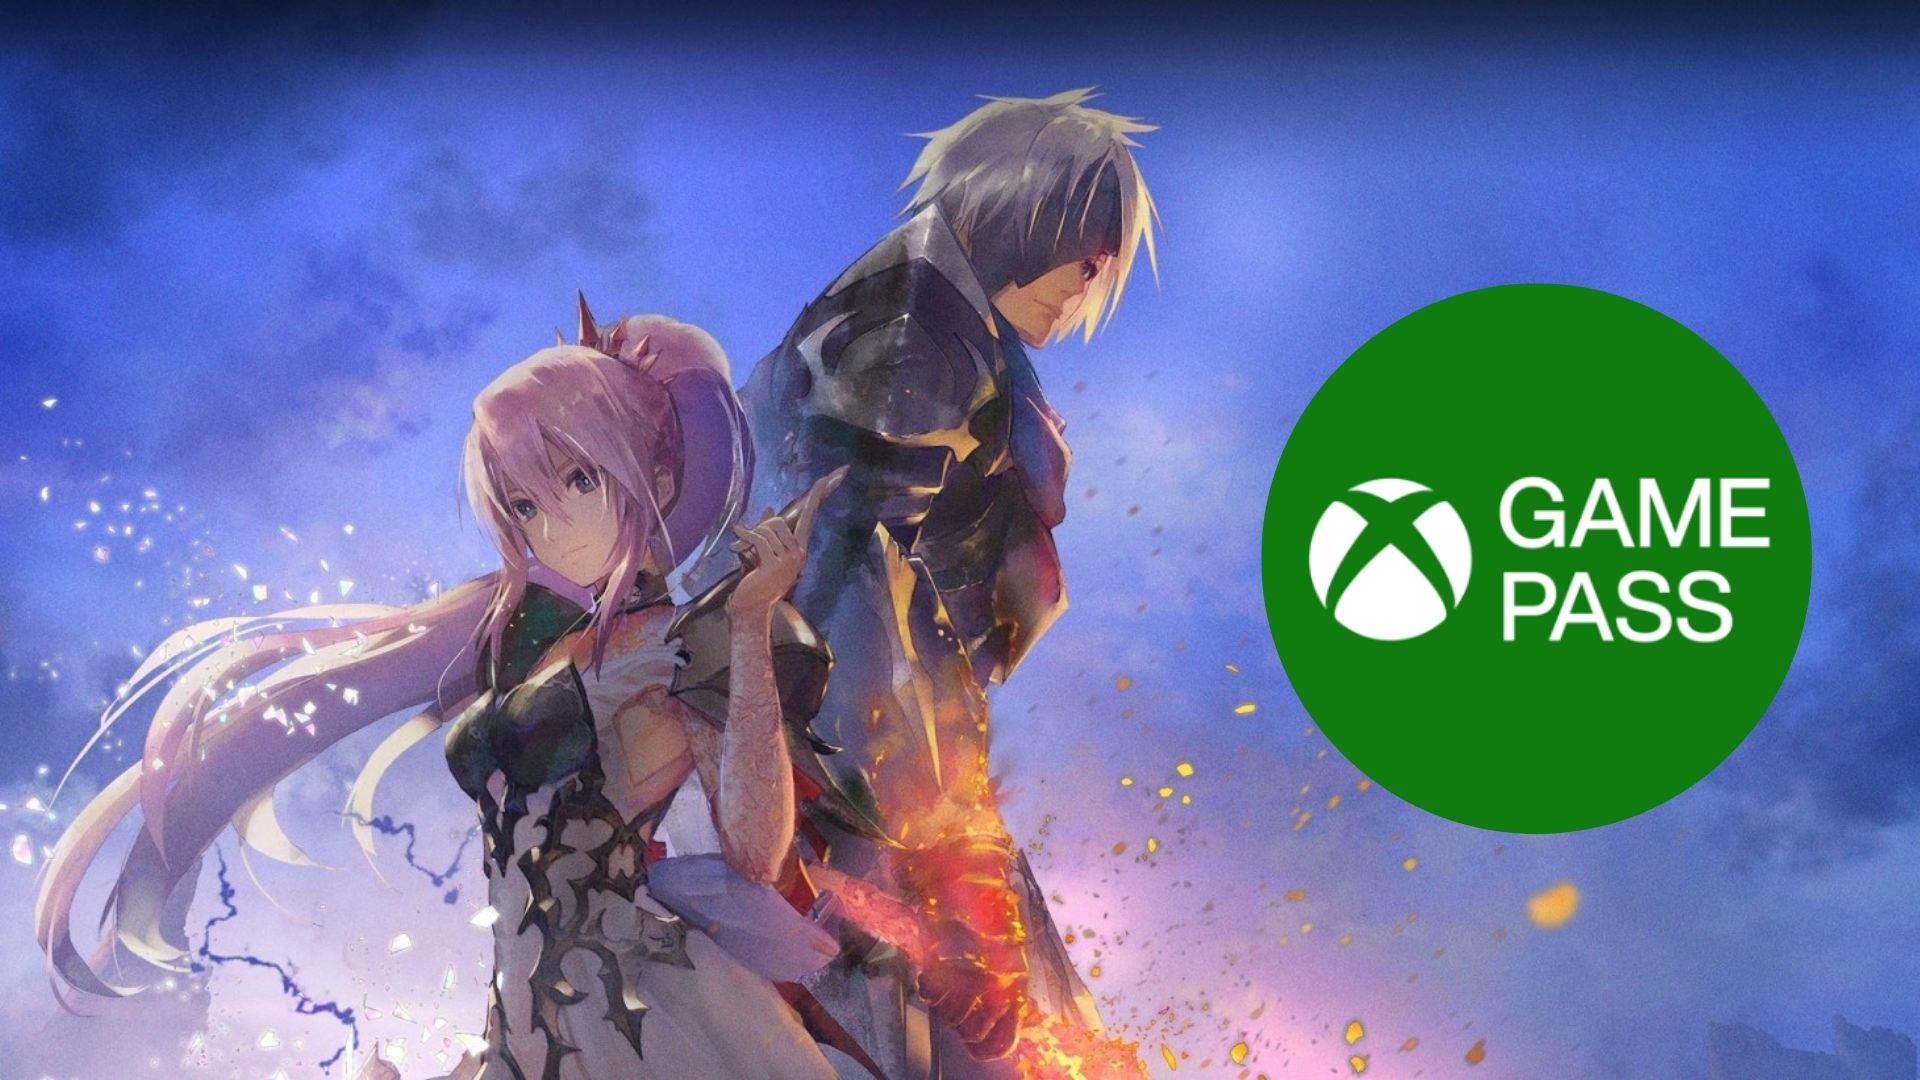 Today we receive two great games joining the Xbox Game Pass family